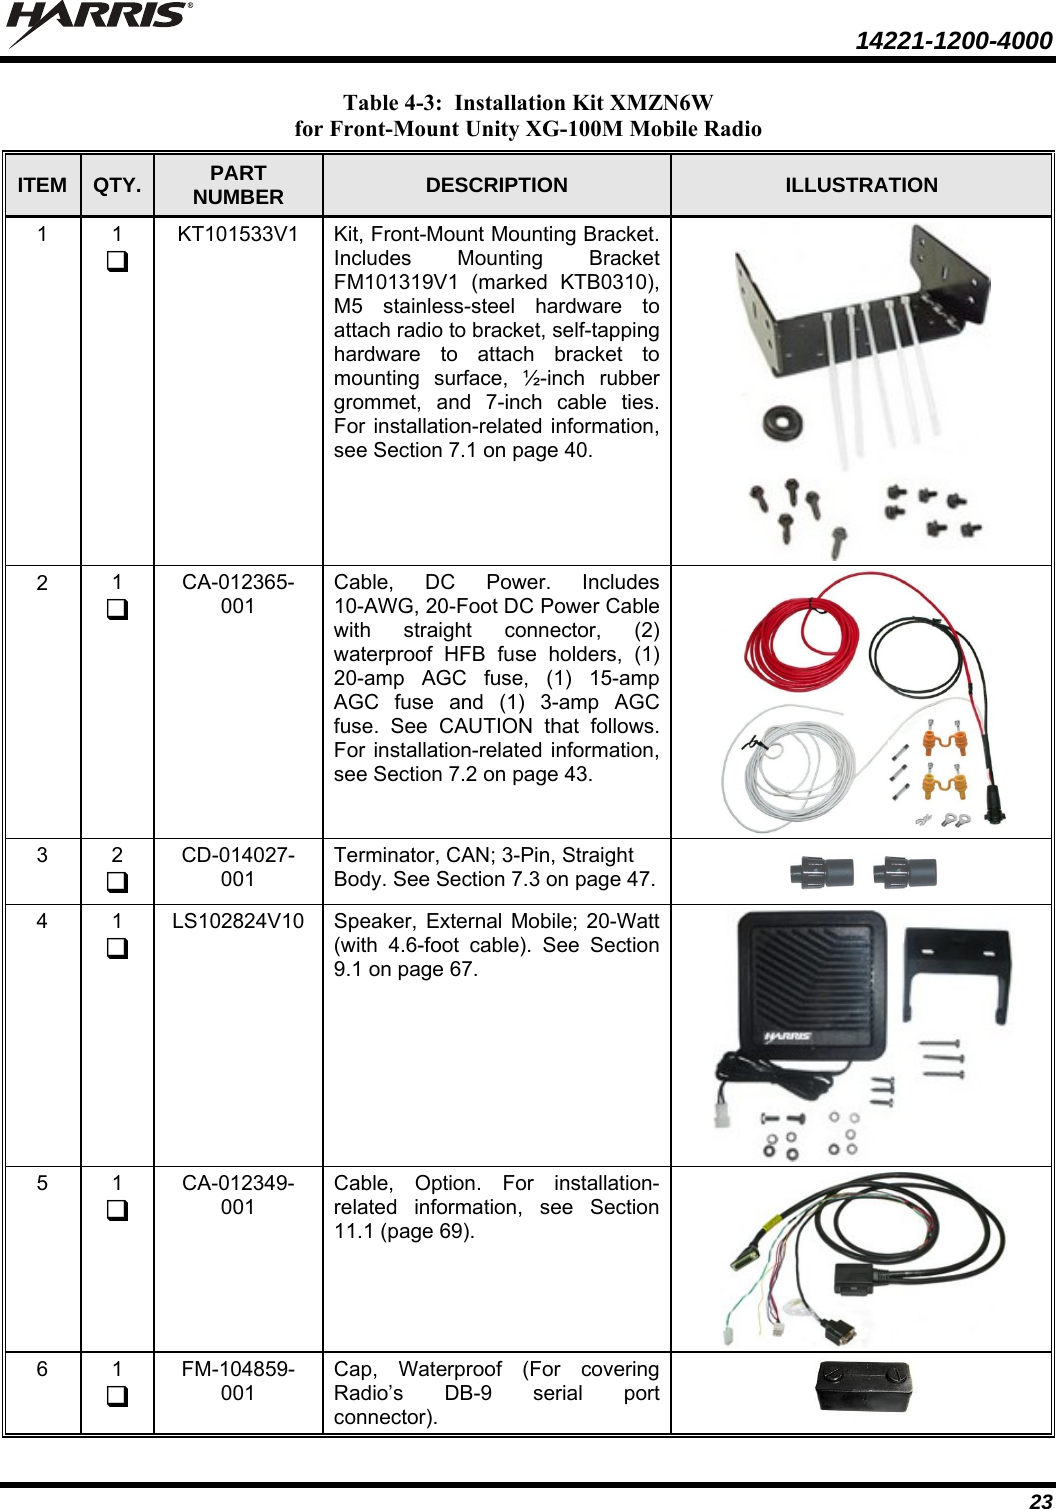  14221-1200-4000  23 Table 4-3:  Installation Kit XMZN6W for Front-Mount Unity XG-100M Mobile Radio ITEM  QTY.  PART NUMBER  DESCRIPTION  ILLUSTRATION 1  1  KT101533V1  Kit, Front-Mount Mounting Bracket. Includes Mounting Bracket FM101319V1 (marked KTB0310), M5 stainless-steel hardware to attach radio to bracket, self-tapping hardware to attach bracket to mounting surface, ½-inch rubber grommet, and 7-inch cable ties. For installation-related information, see Section 7.1 on page 40. 2  1  CA-012365-001 Cable, DC Power. Includes 10-AWG, 20-Foot DC Power Cable with straight connector, (2) waterproof HFB fuse holders, (1) 20-amp AGC fuse, (1) 15-amp AGC fuse and (1) 3-amp AGC fuse. See CAUTION that follows. For installation-related information, see Section 7.2 on page 43. 3  2  CD-014027-001 Terminator, CAN; 3-Pin, Straight Body. See Section 7.3 on page 47.       4  1  LS102824V10  Speaker, External Mobile; 20-Watt (with 4.6-foot cable). See Section 9.1 on page 67. 5  1  CA-012349-001 Cable, Option. For installation-related information, see Section 11.1 (page 69). 6  1  FM-104859-001 Cap, Waterproof (For covering Radio’s DB-9 serial port connector).    